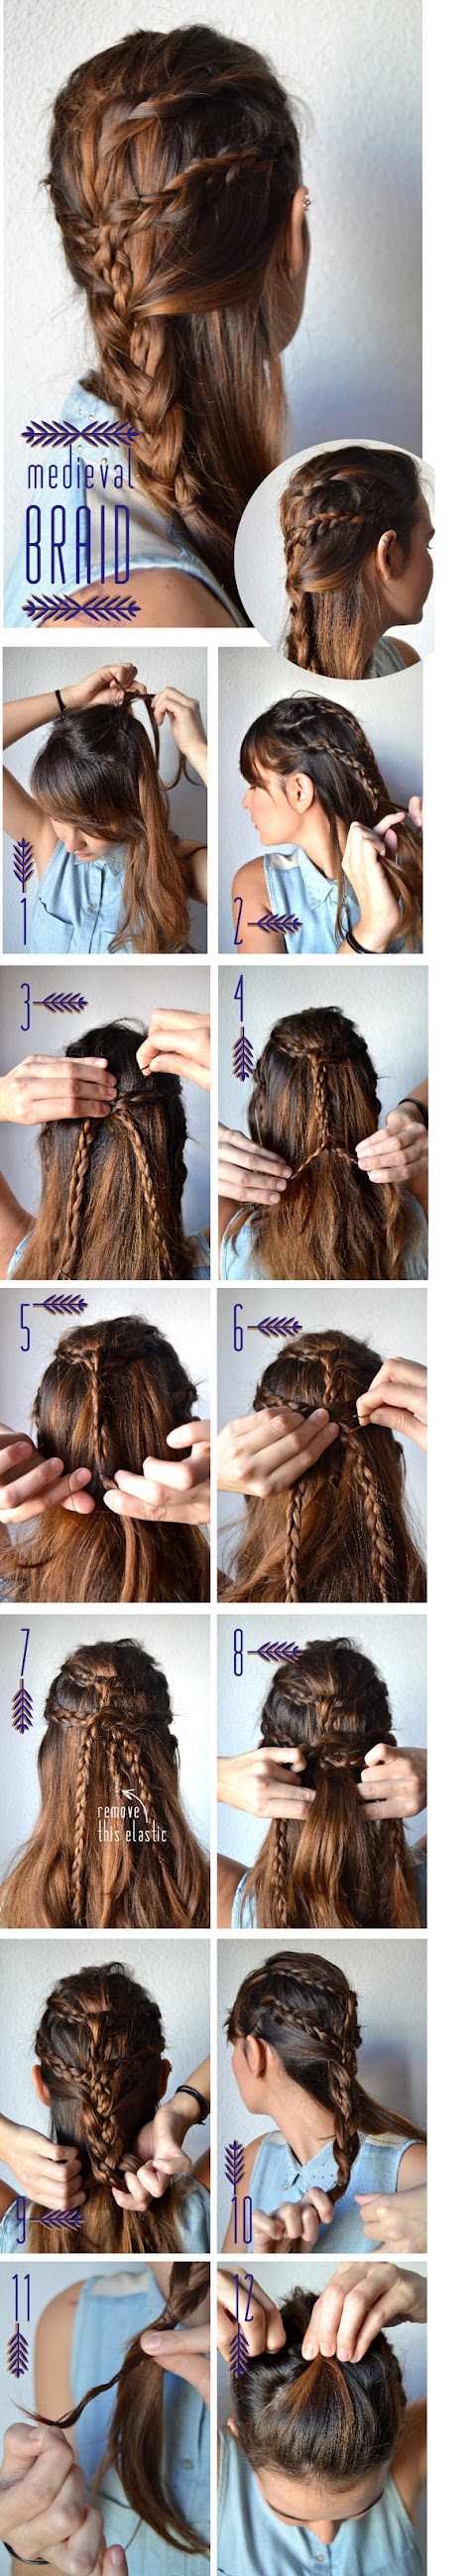 Make a Medieval Braid For Your Hair